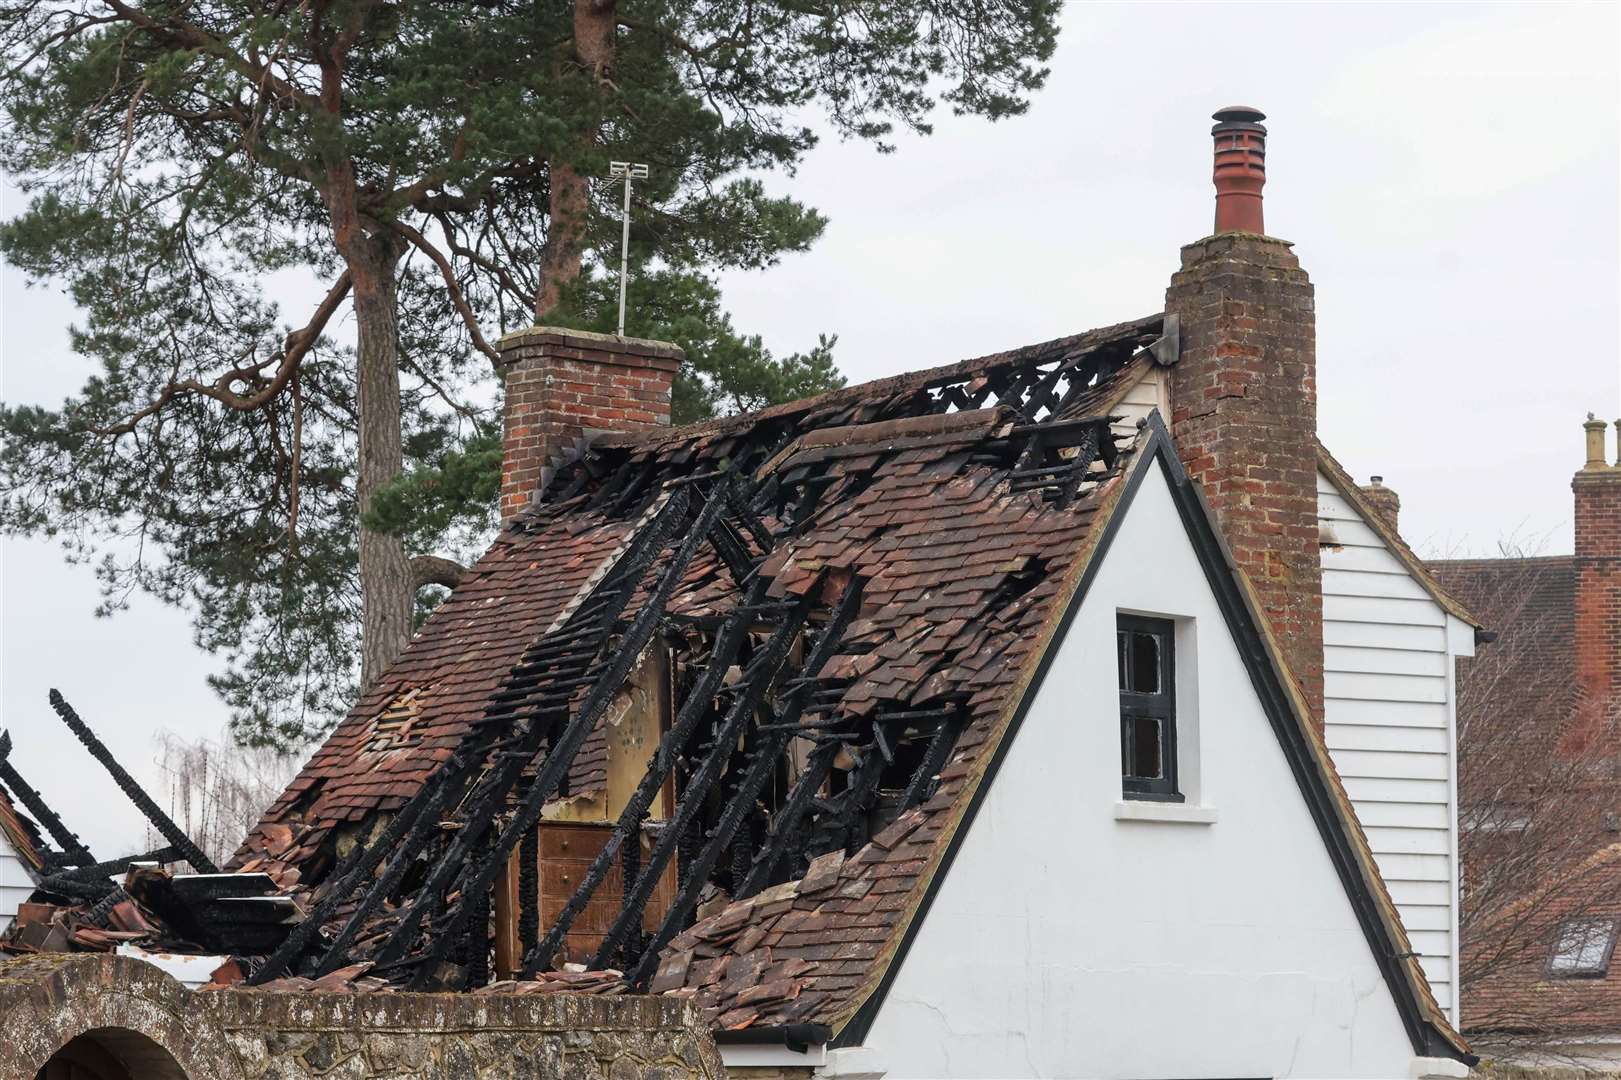 The damage caused by the fire in West Malling. Picture: UKNIP